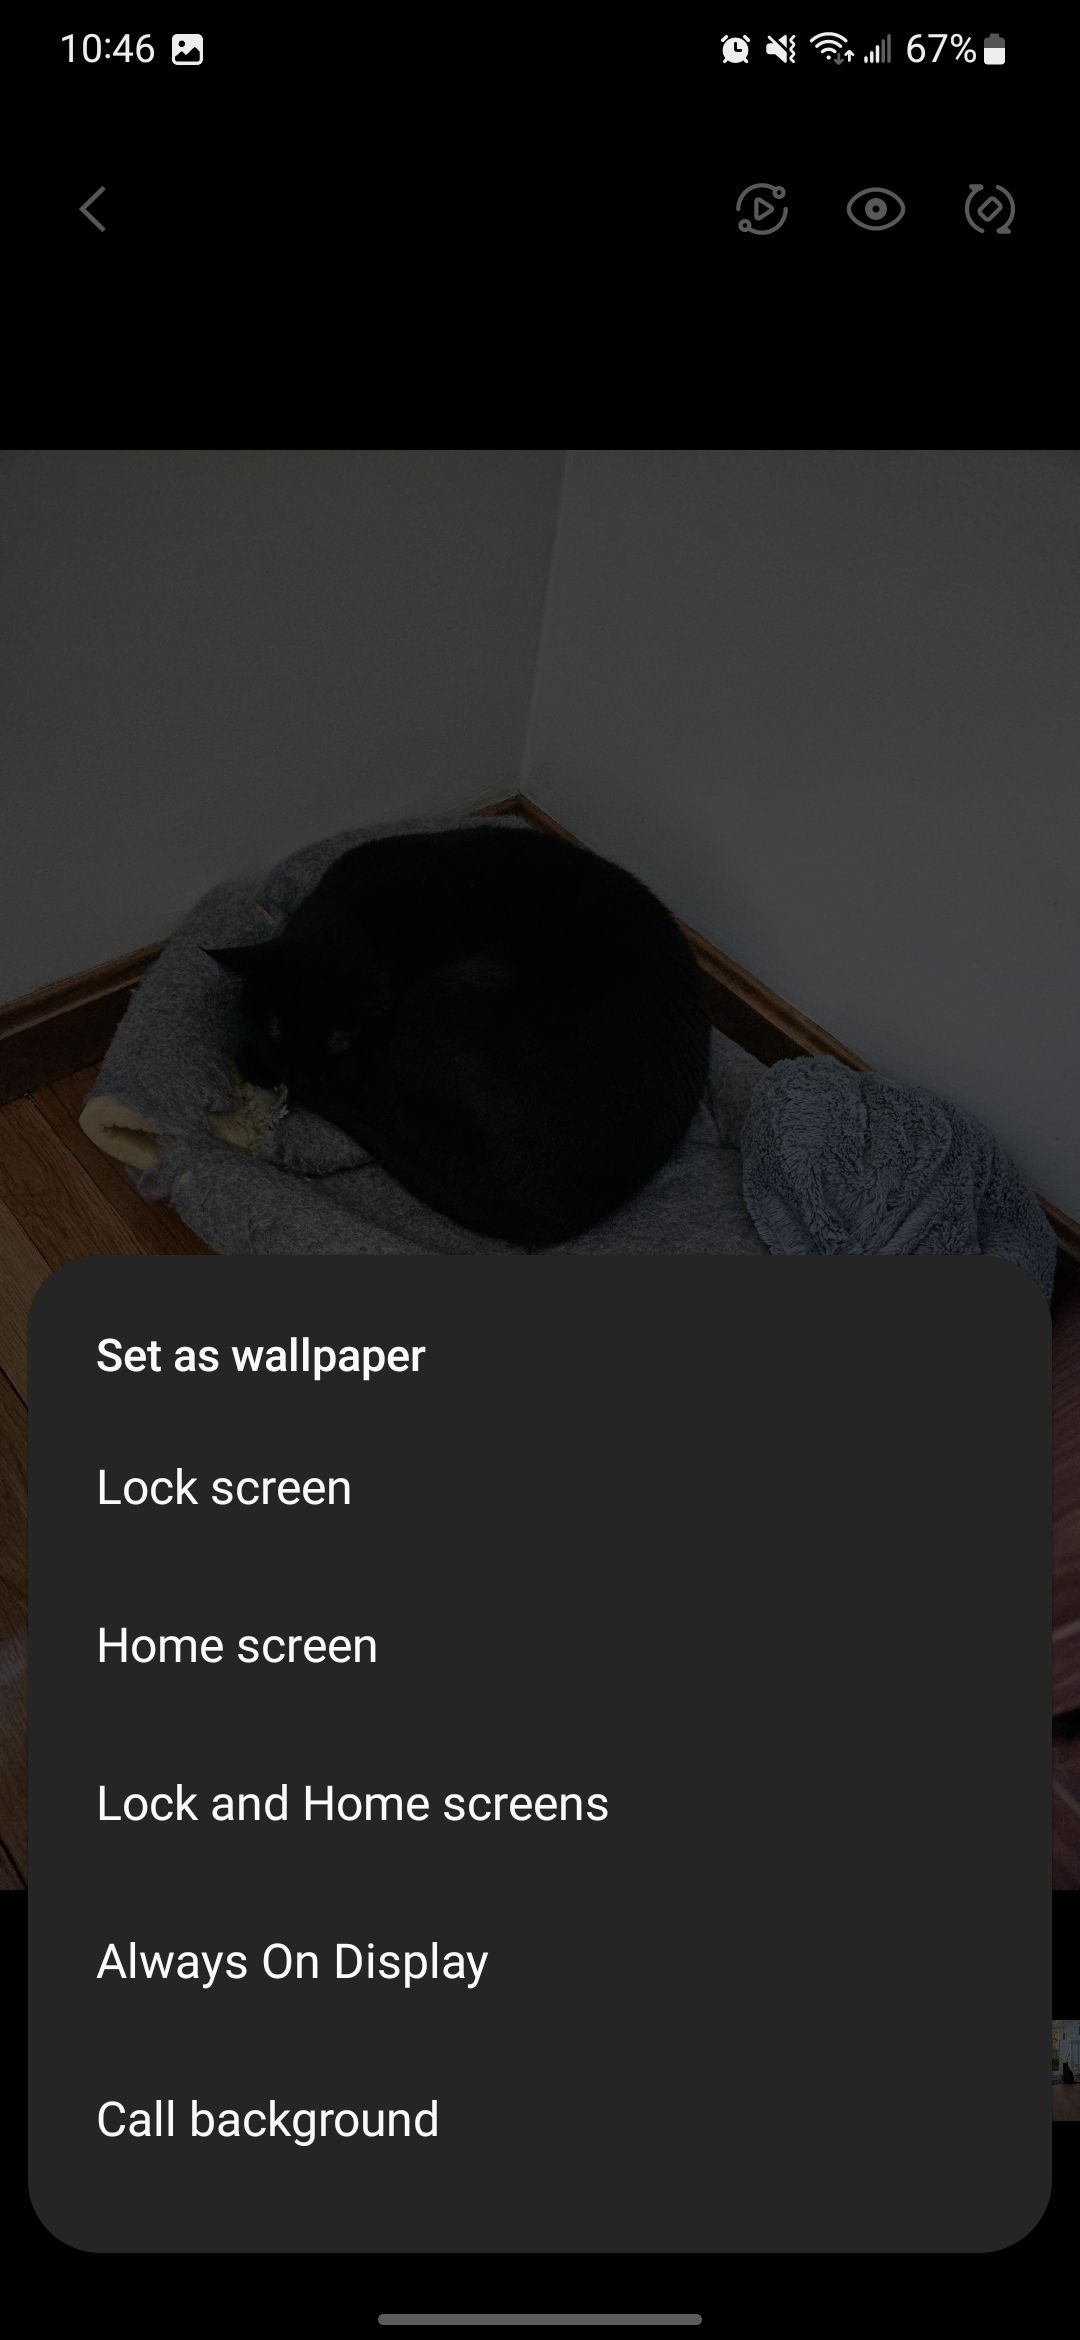 The set as wallpaper options in the Samsung Gallery app